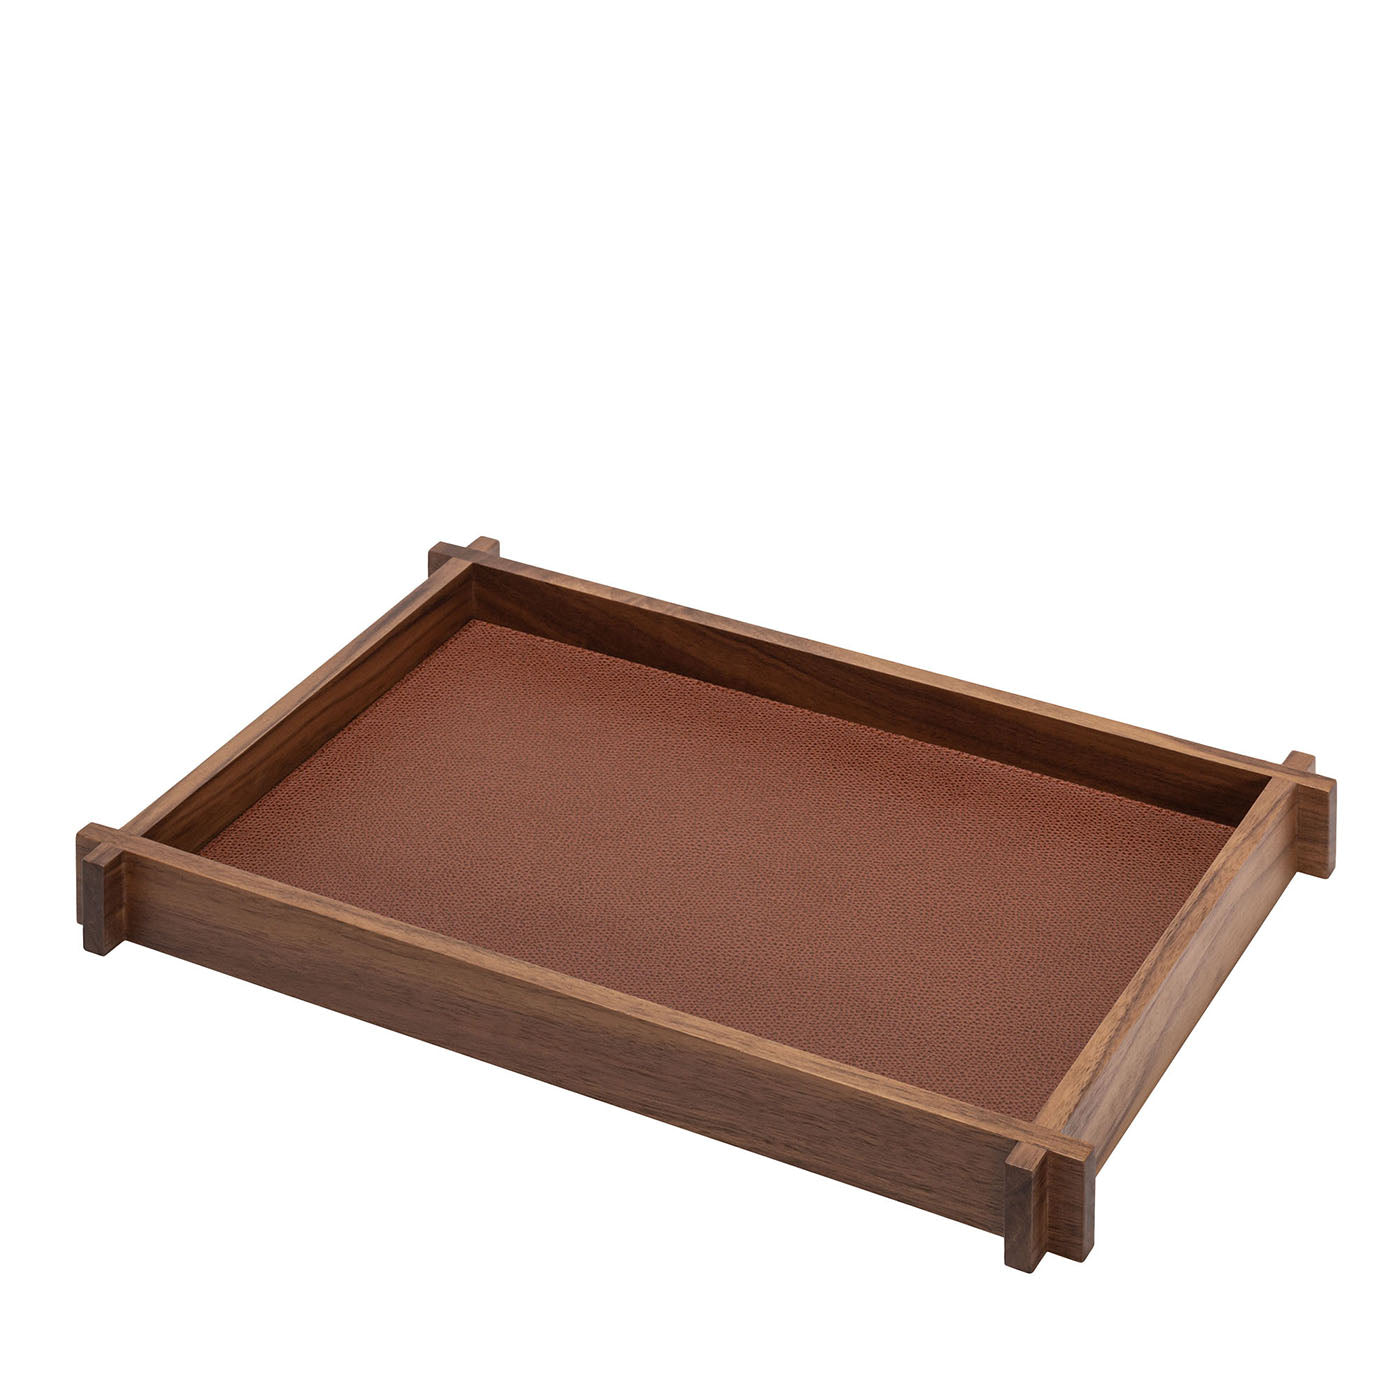 Structura Leather & Wood Long Rectangular Valet Tray Large #2 - Main view